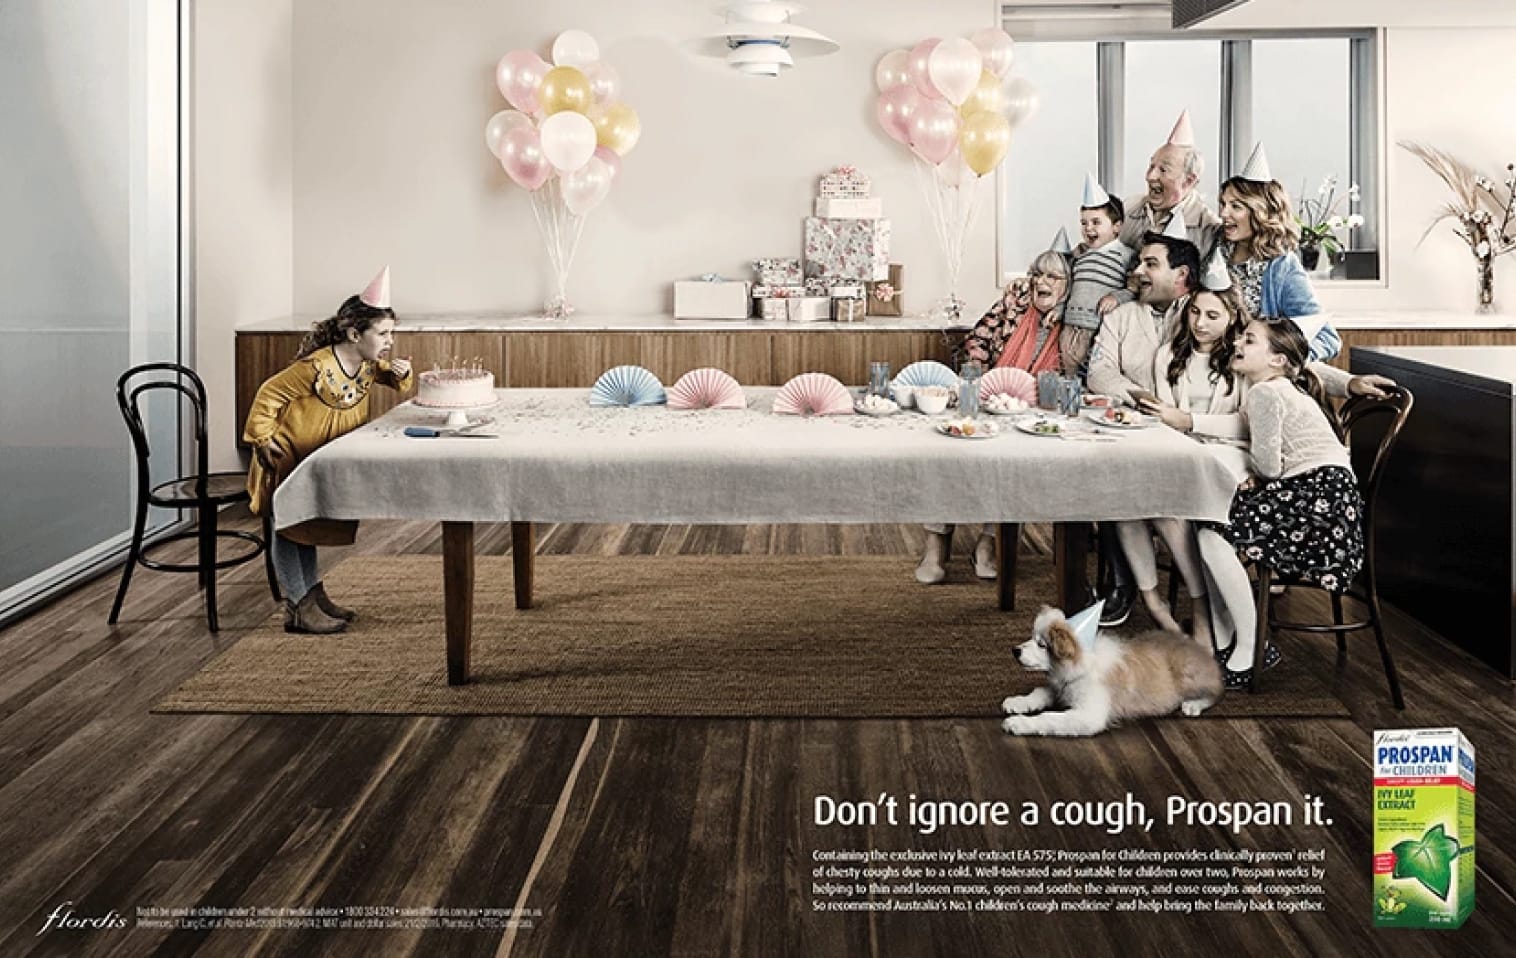 An advert for Prospan depicting a young girl blowing out her birthday candles as her family cowers at the far end of the family dining table because she has a cold.